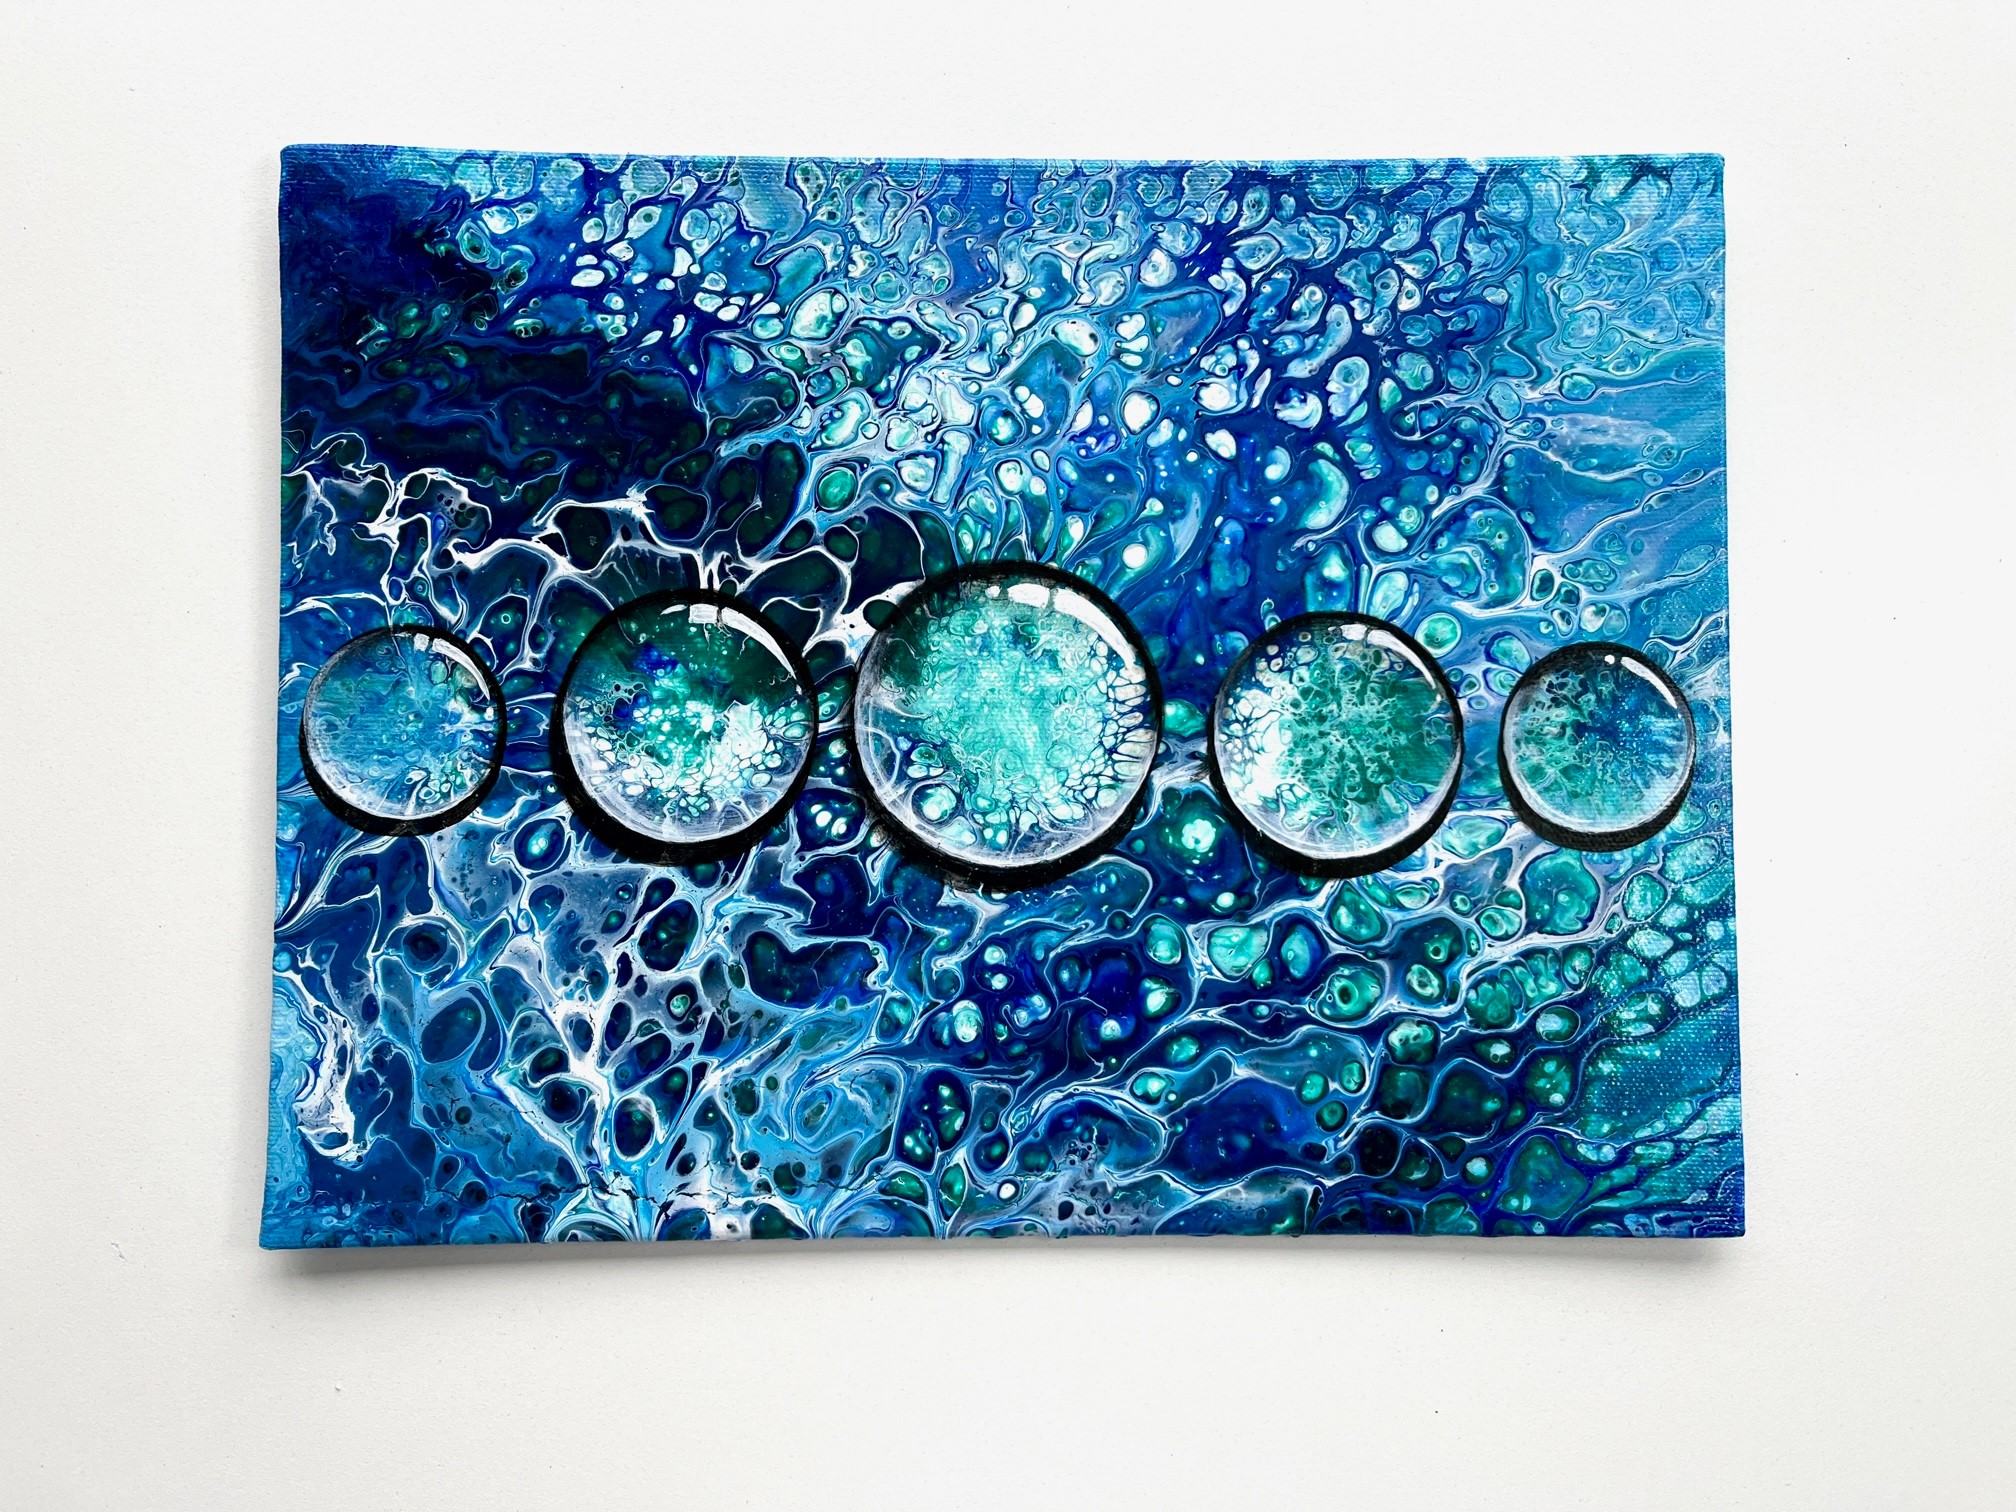 Get Better ACRYLIC POURING Results By Following 3 Simple Steps